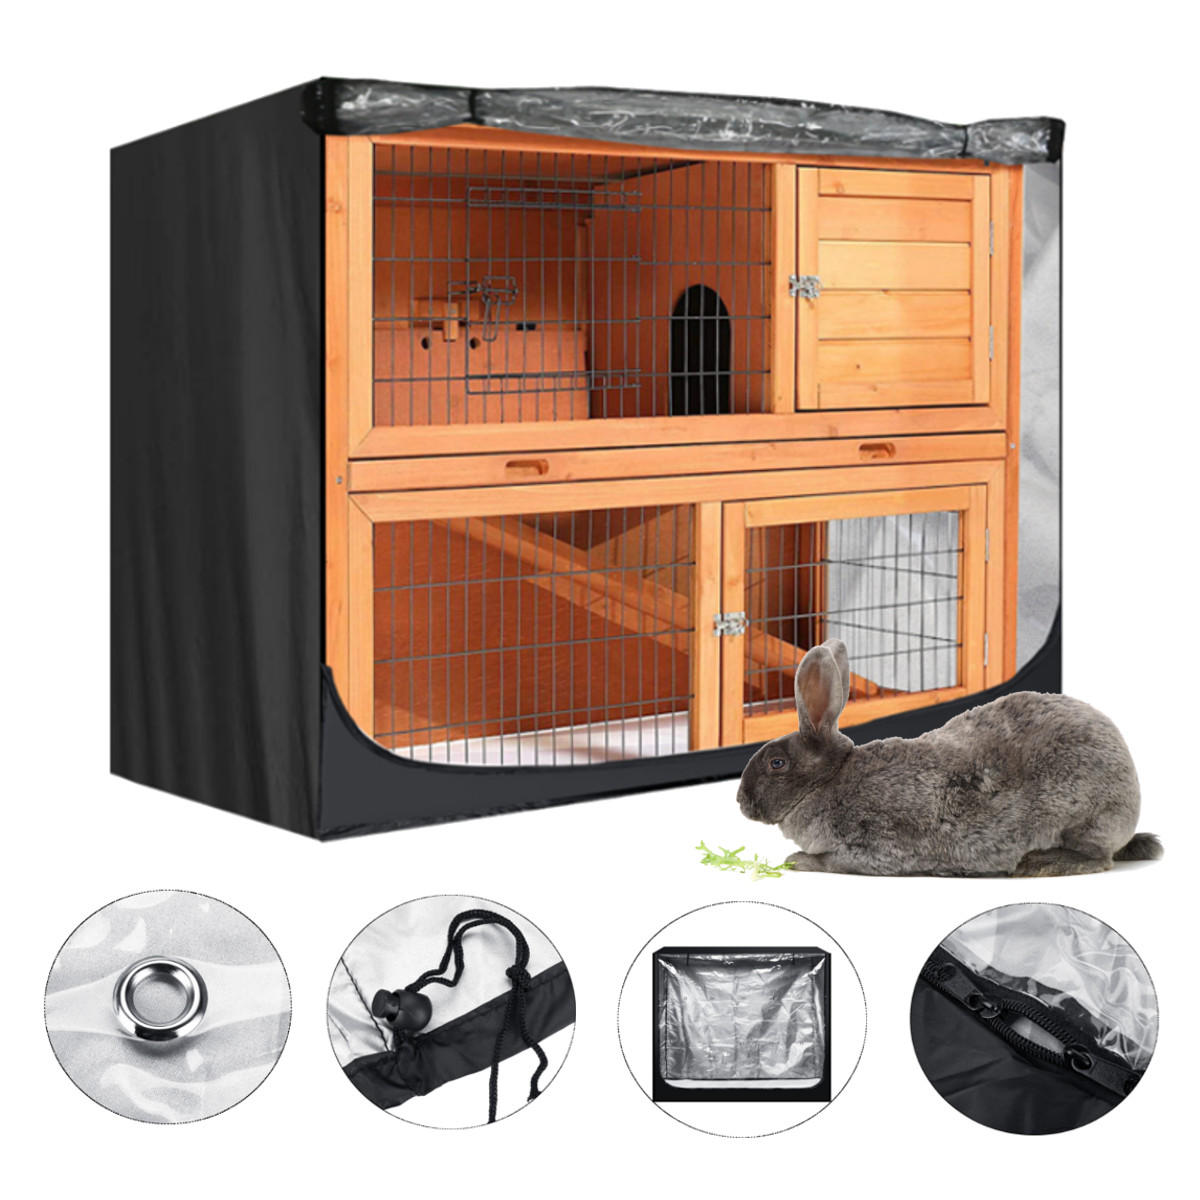 4FT Dustproof Double Layer Rabbit Cage Hutch Cover Rain Wind Snow Protection